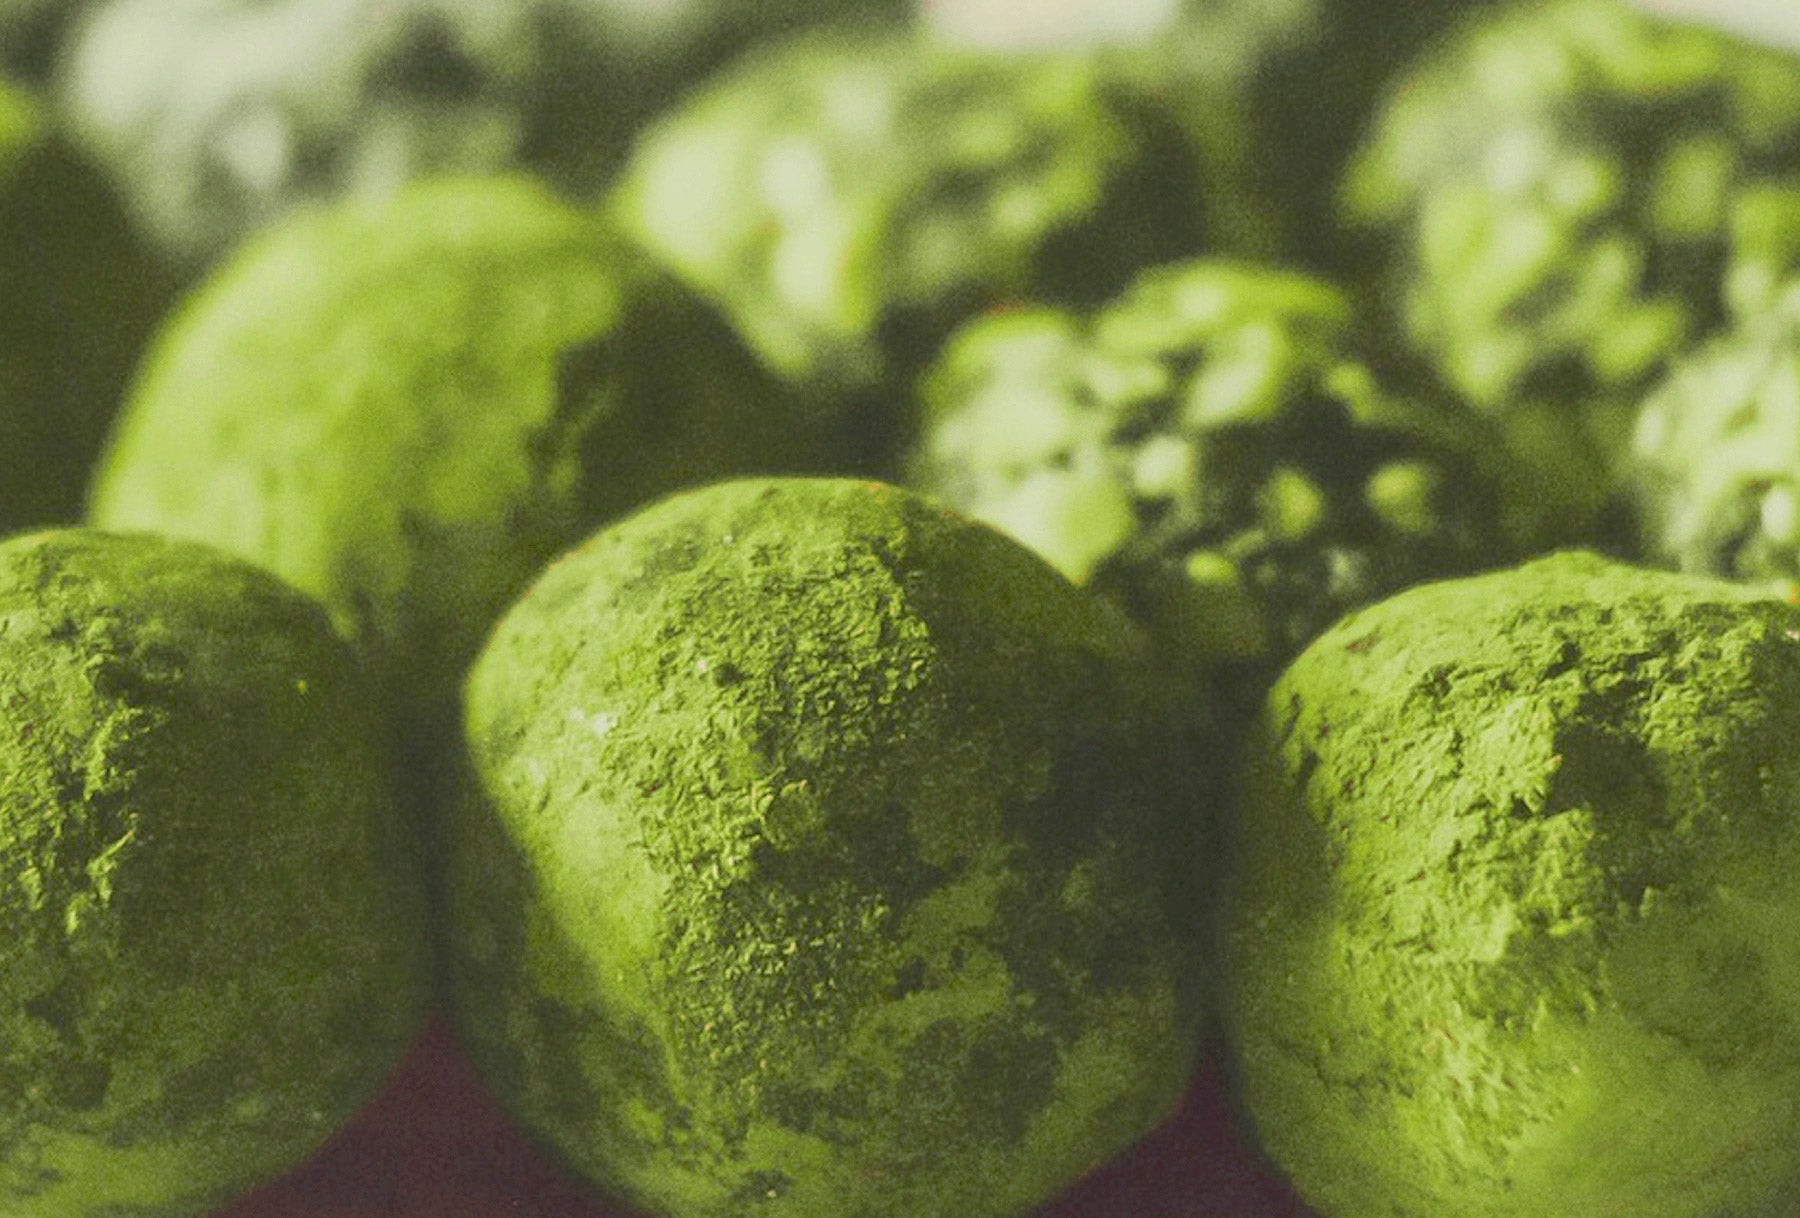 RECIPE: Make these decadent Matcha White Chocolate Truffles from scratch, with just FOUR ingredients!